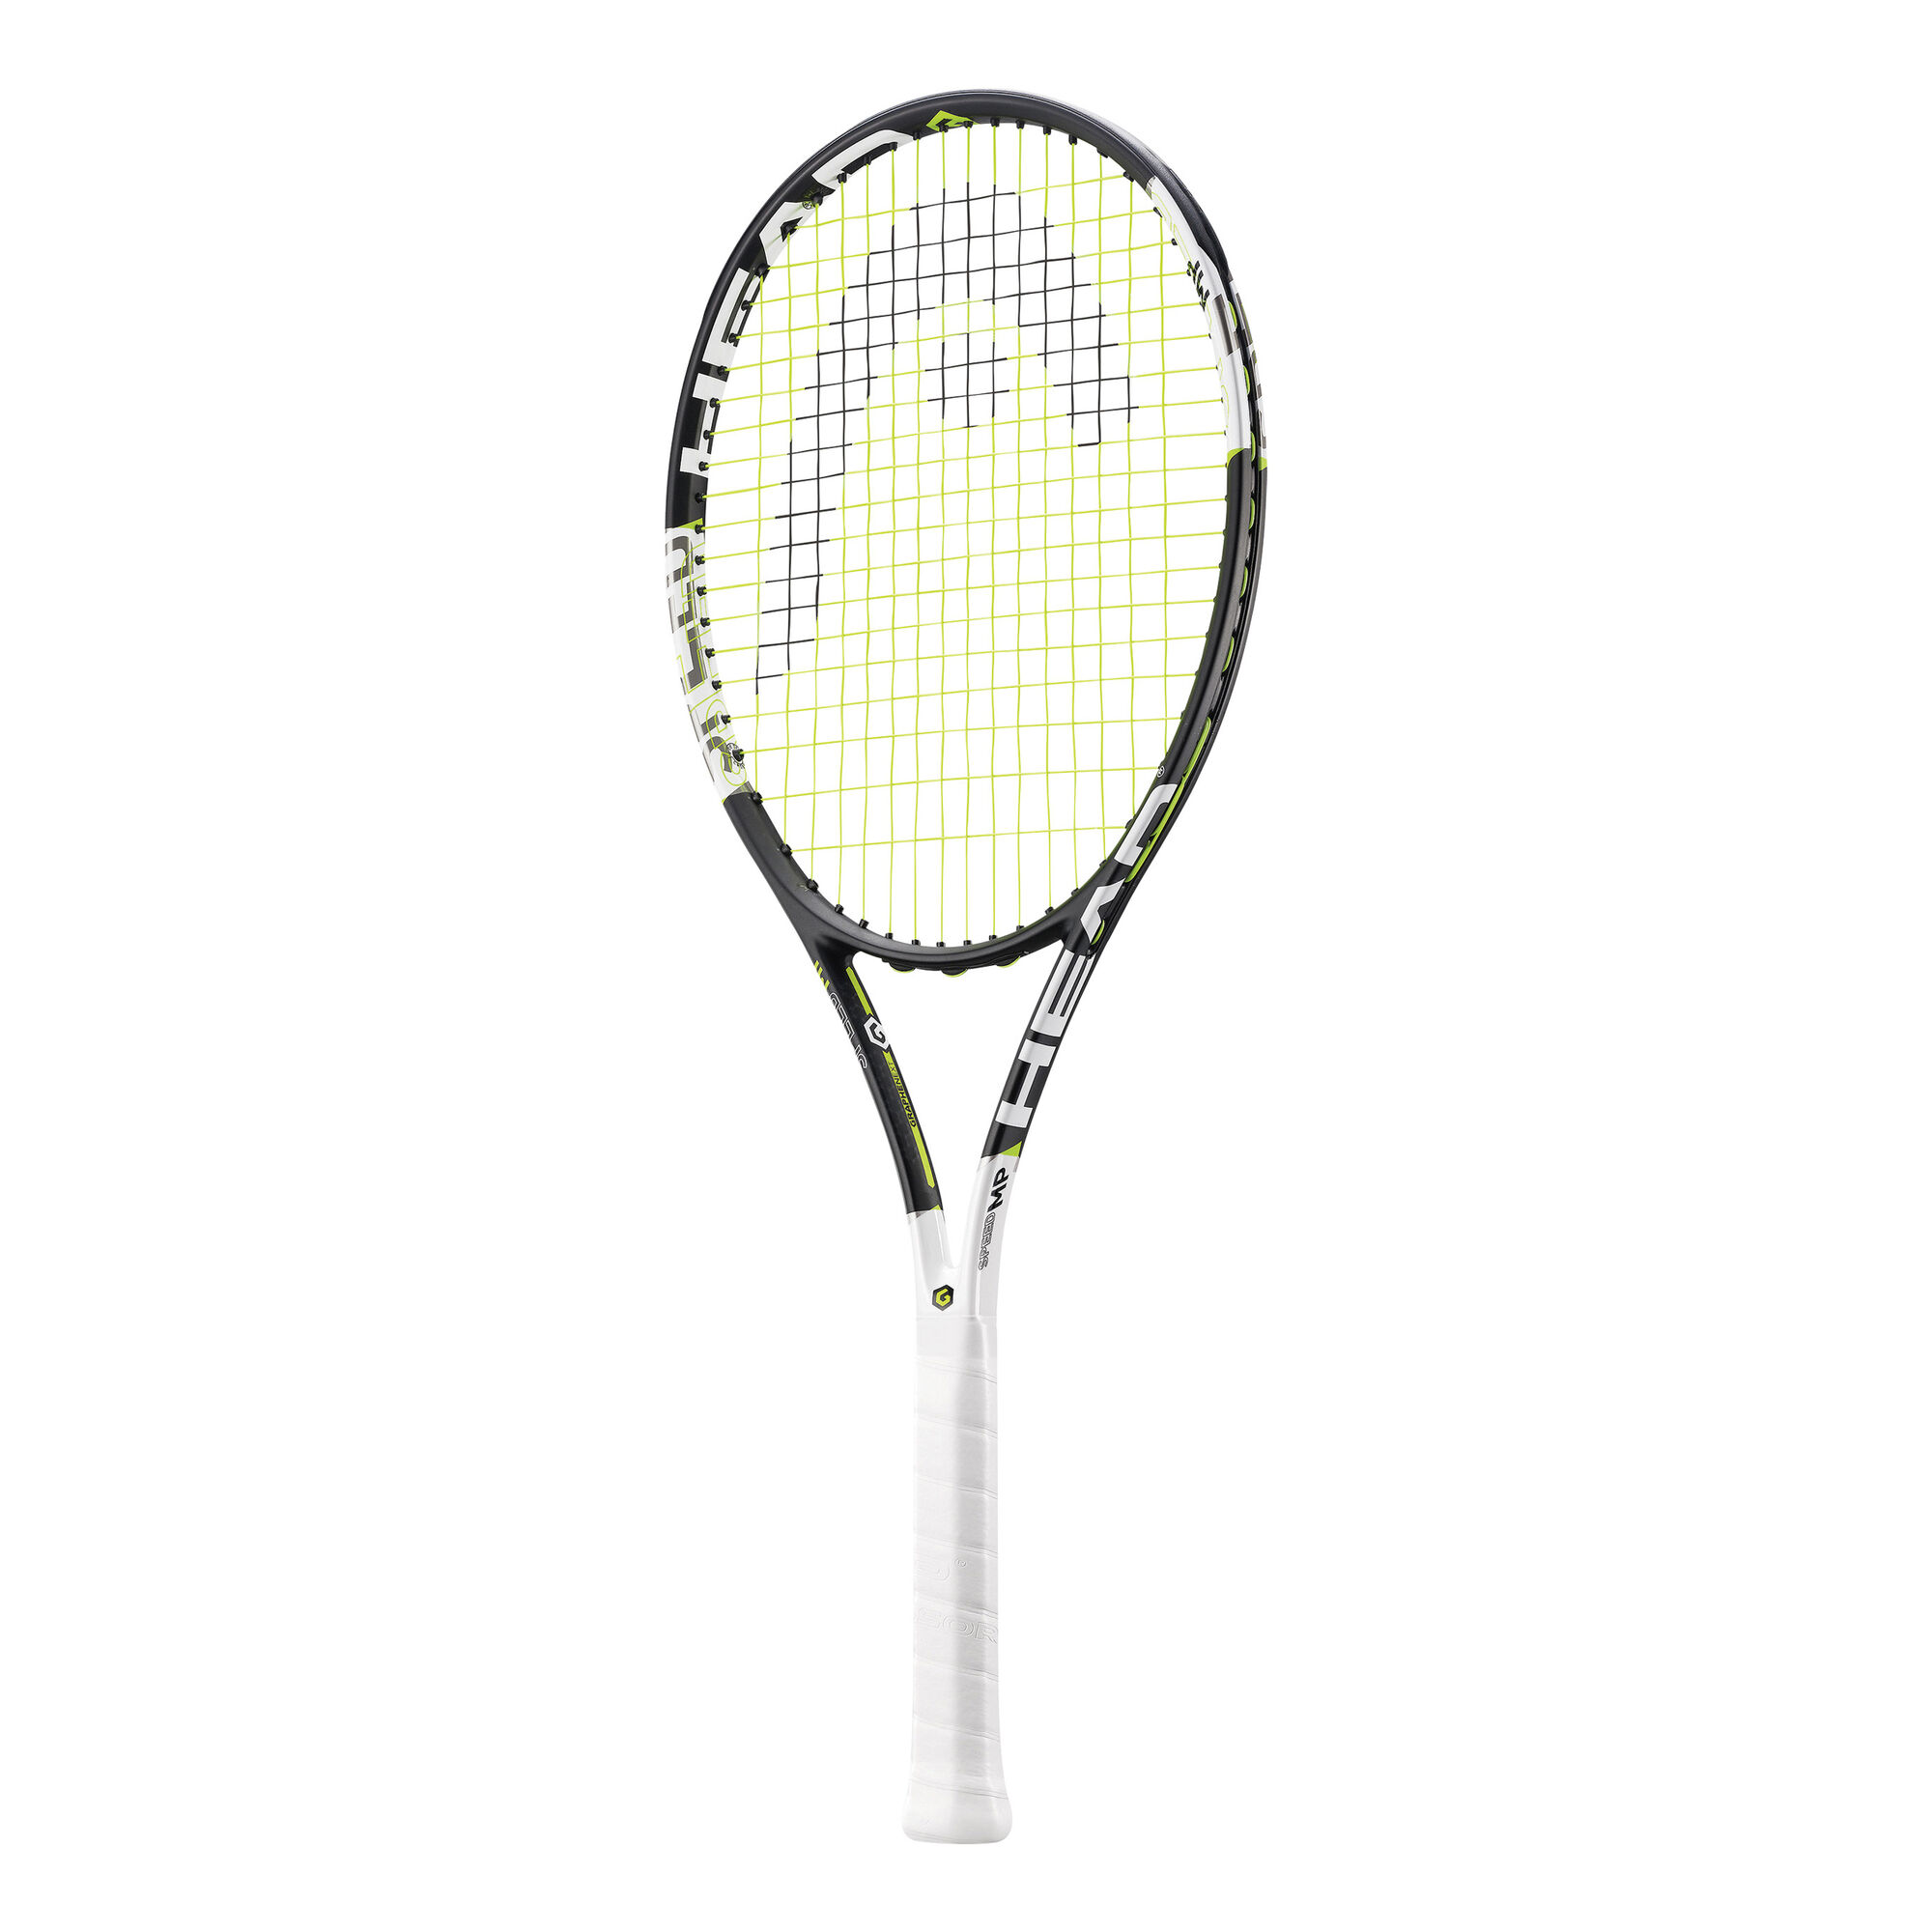 Madeliefje Afname Onderdrukker buy HEAD Graphene XT Speed MP Tour Racket (Special Edition) online |  Tennis-Point